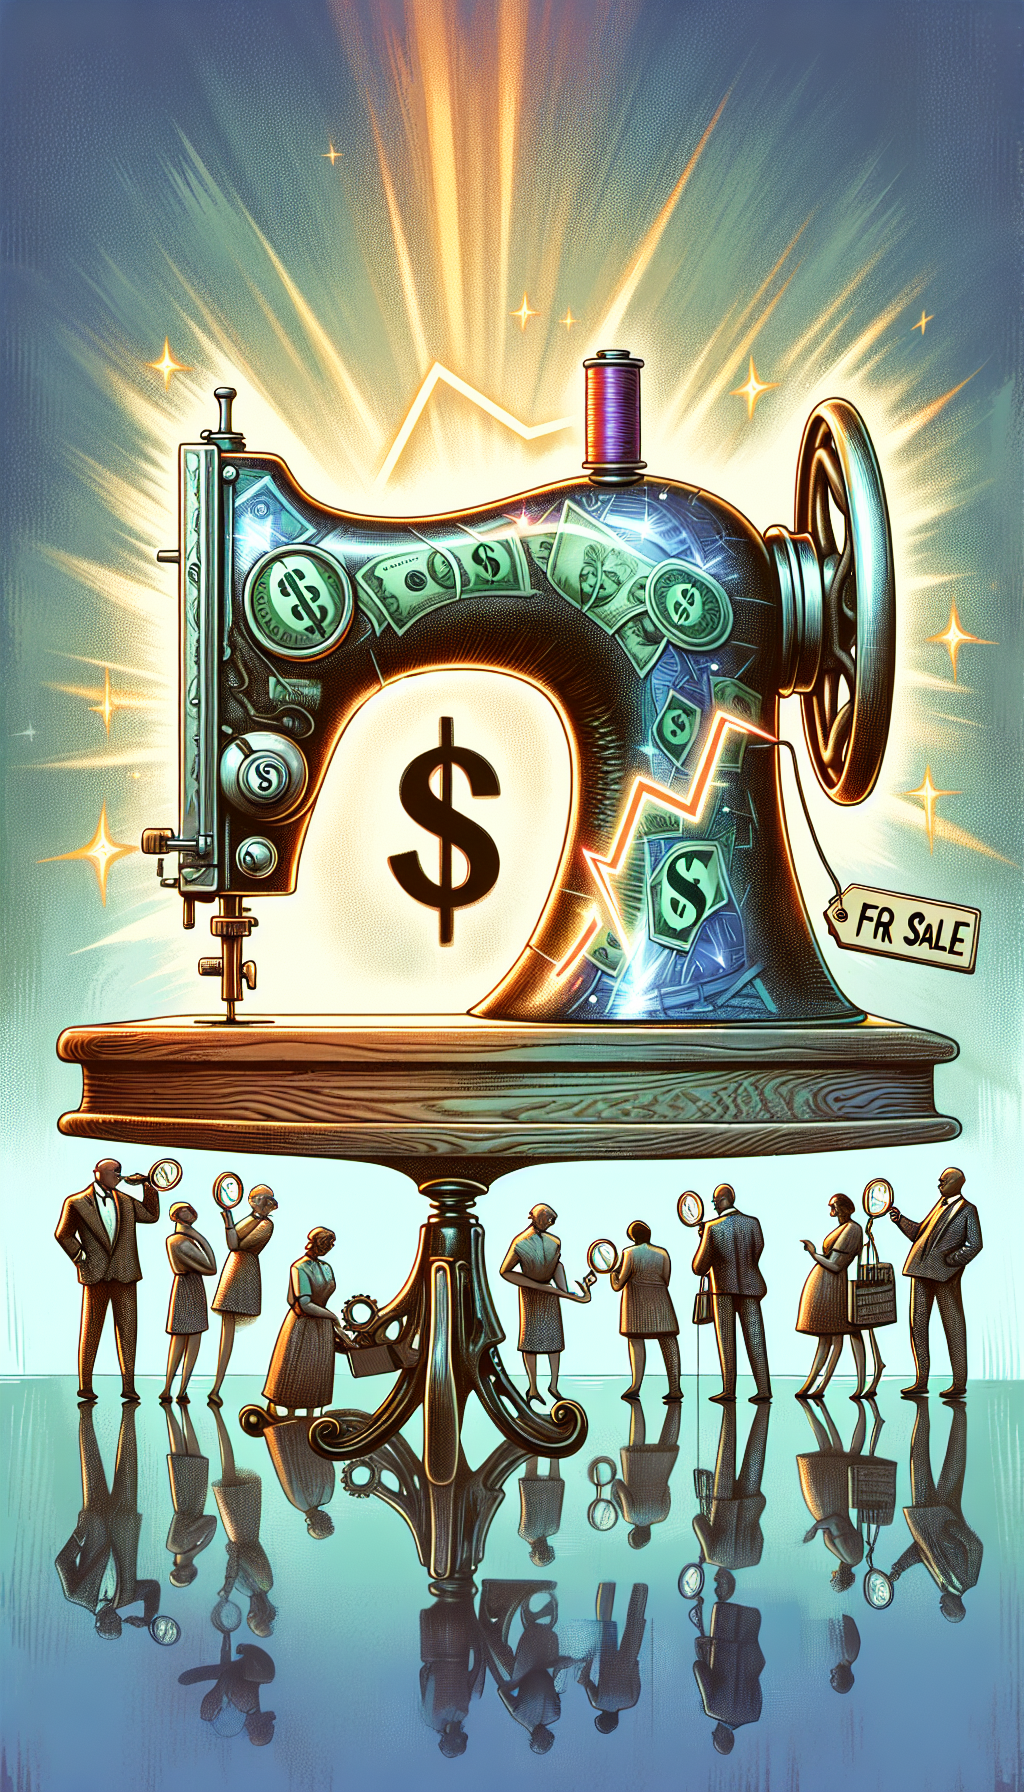 An illustration of a gleaming vintage sewing machine with dollar signs reflected in its polished surface, skillfully placed on a pedestal, like a prized trophy. Around it, miniature figures polish and appraise it, with magnifying glasses showing hidden features, while a "For Sale" tag hangs with a rising graph line to depict increasing value. The scene merges classic etching with vibrant, modern color accents.